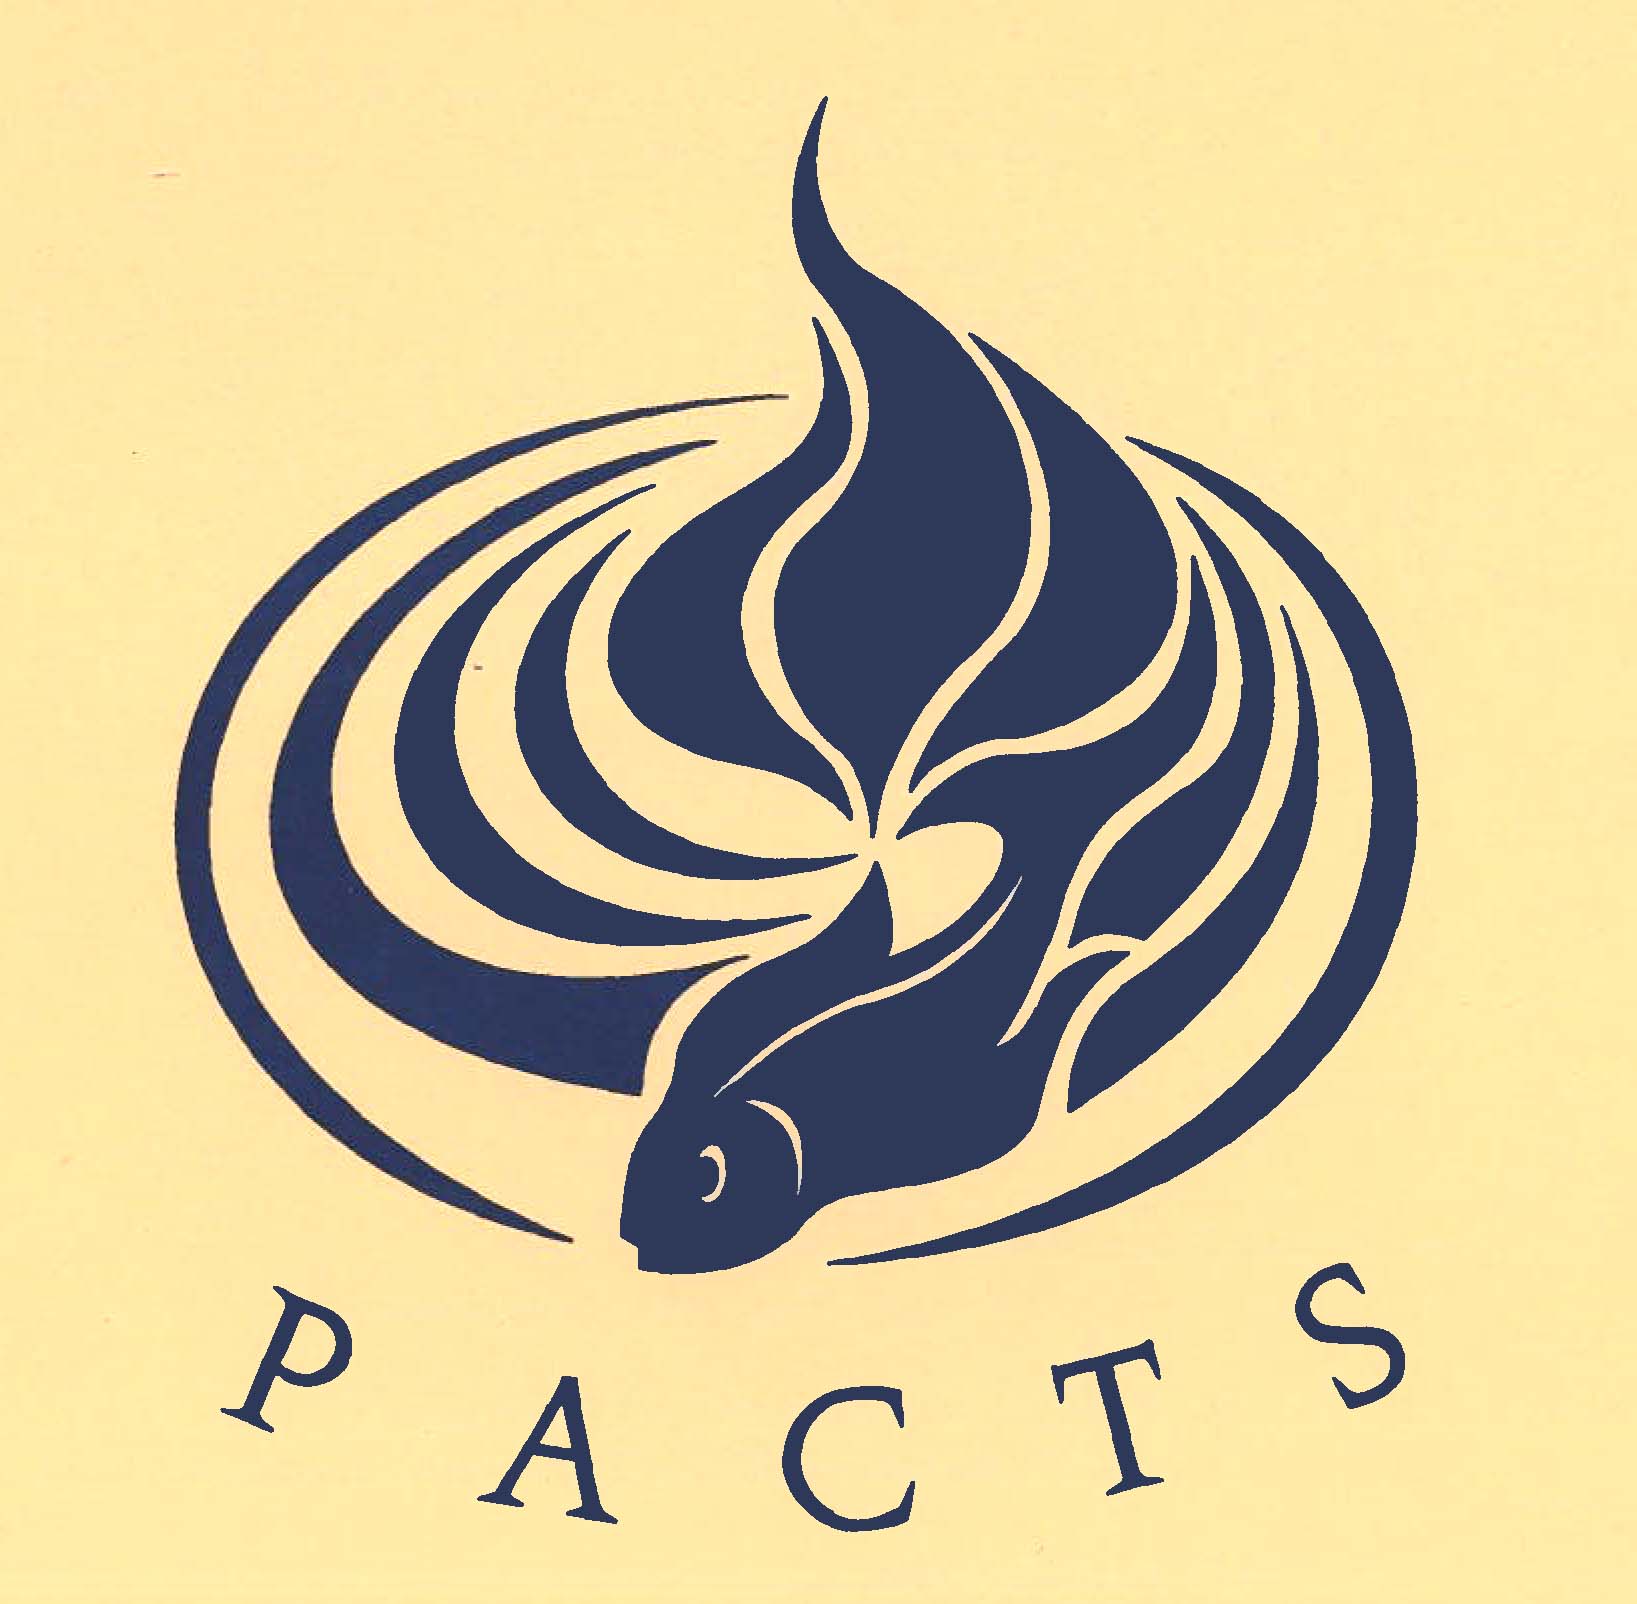 PACTS logo